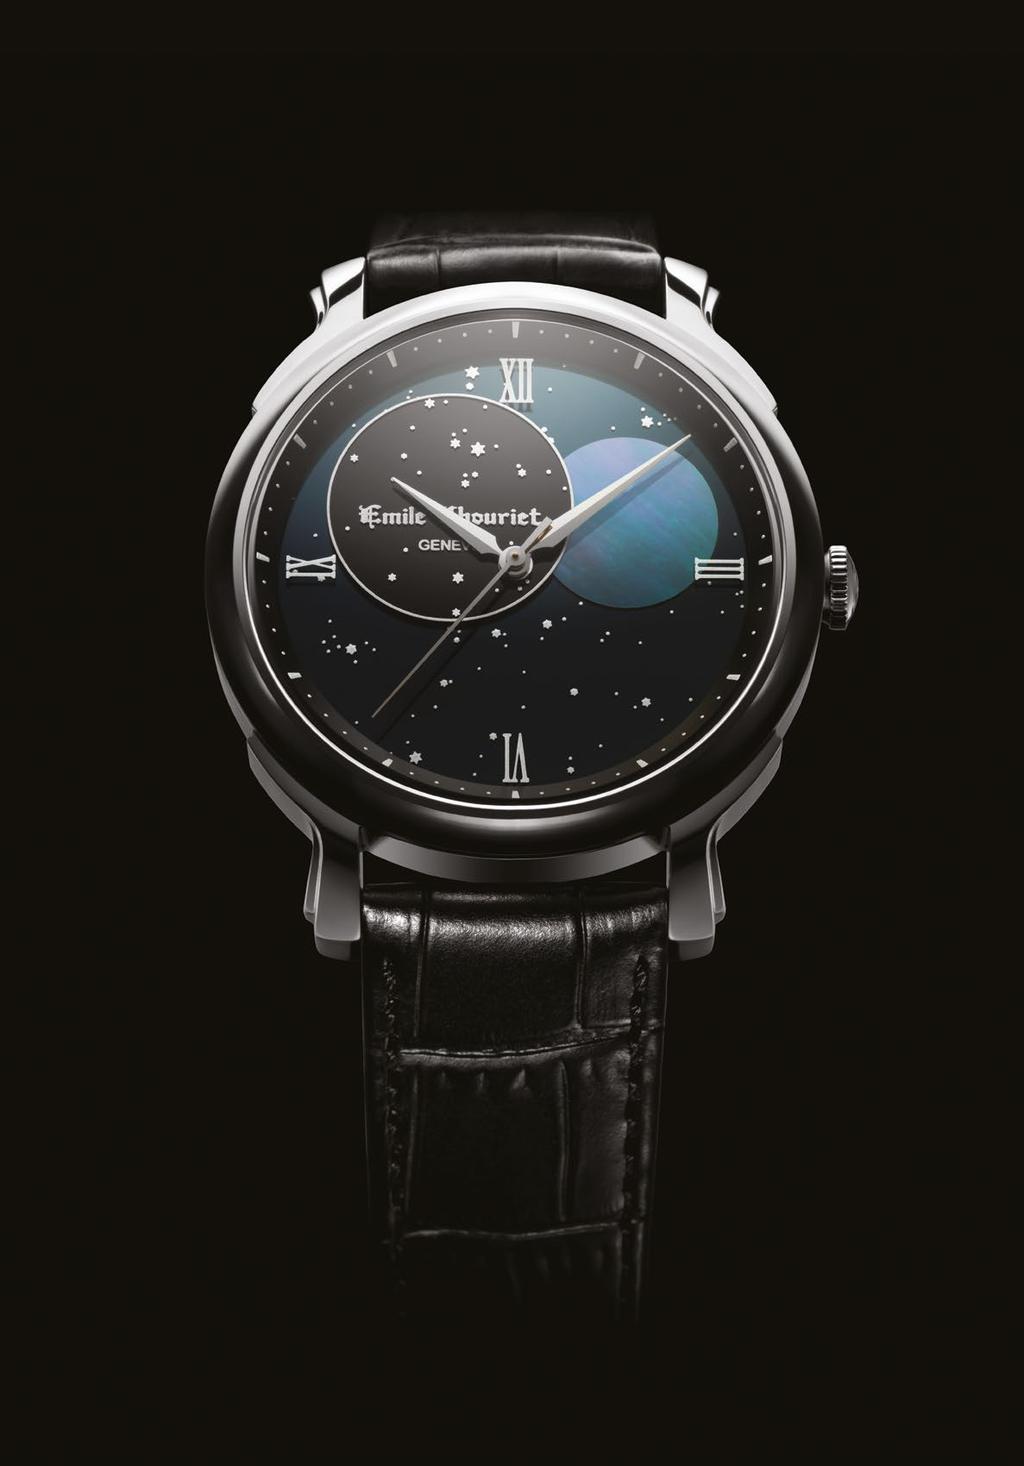 37 GENEVA COLLECTIONS 38 Voie Lactée LOOK AT STARS AND SEE OUR MEMORY The Voie Lactée celebrates the fascination